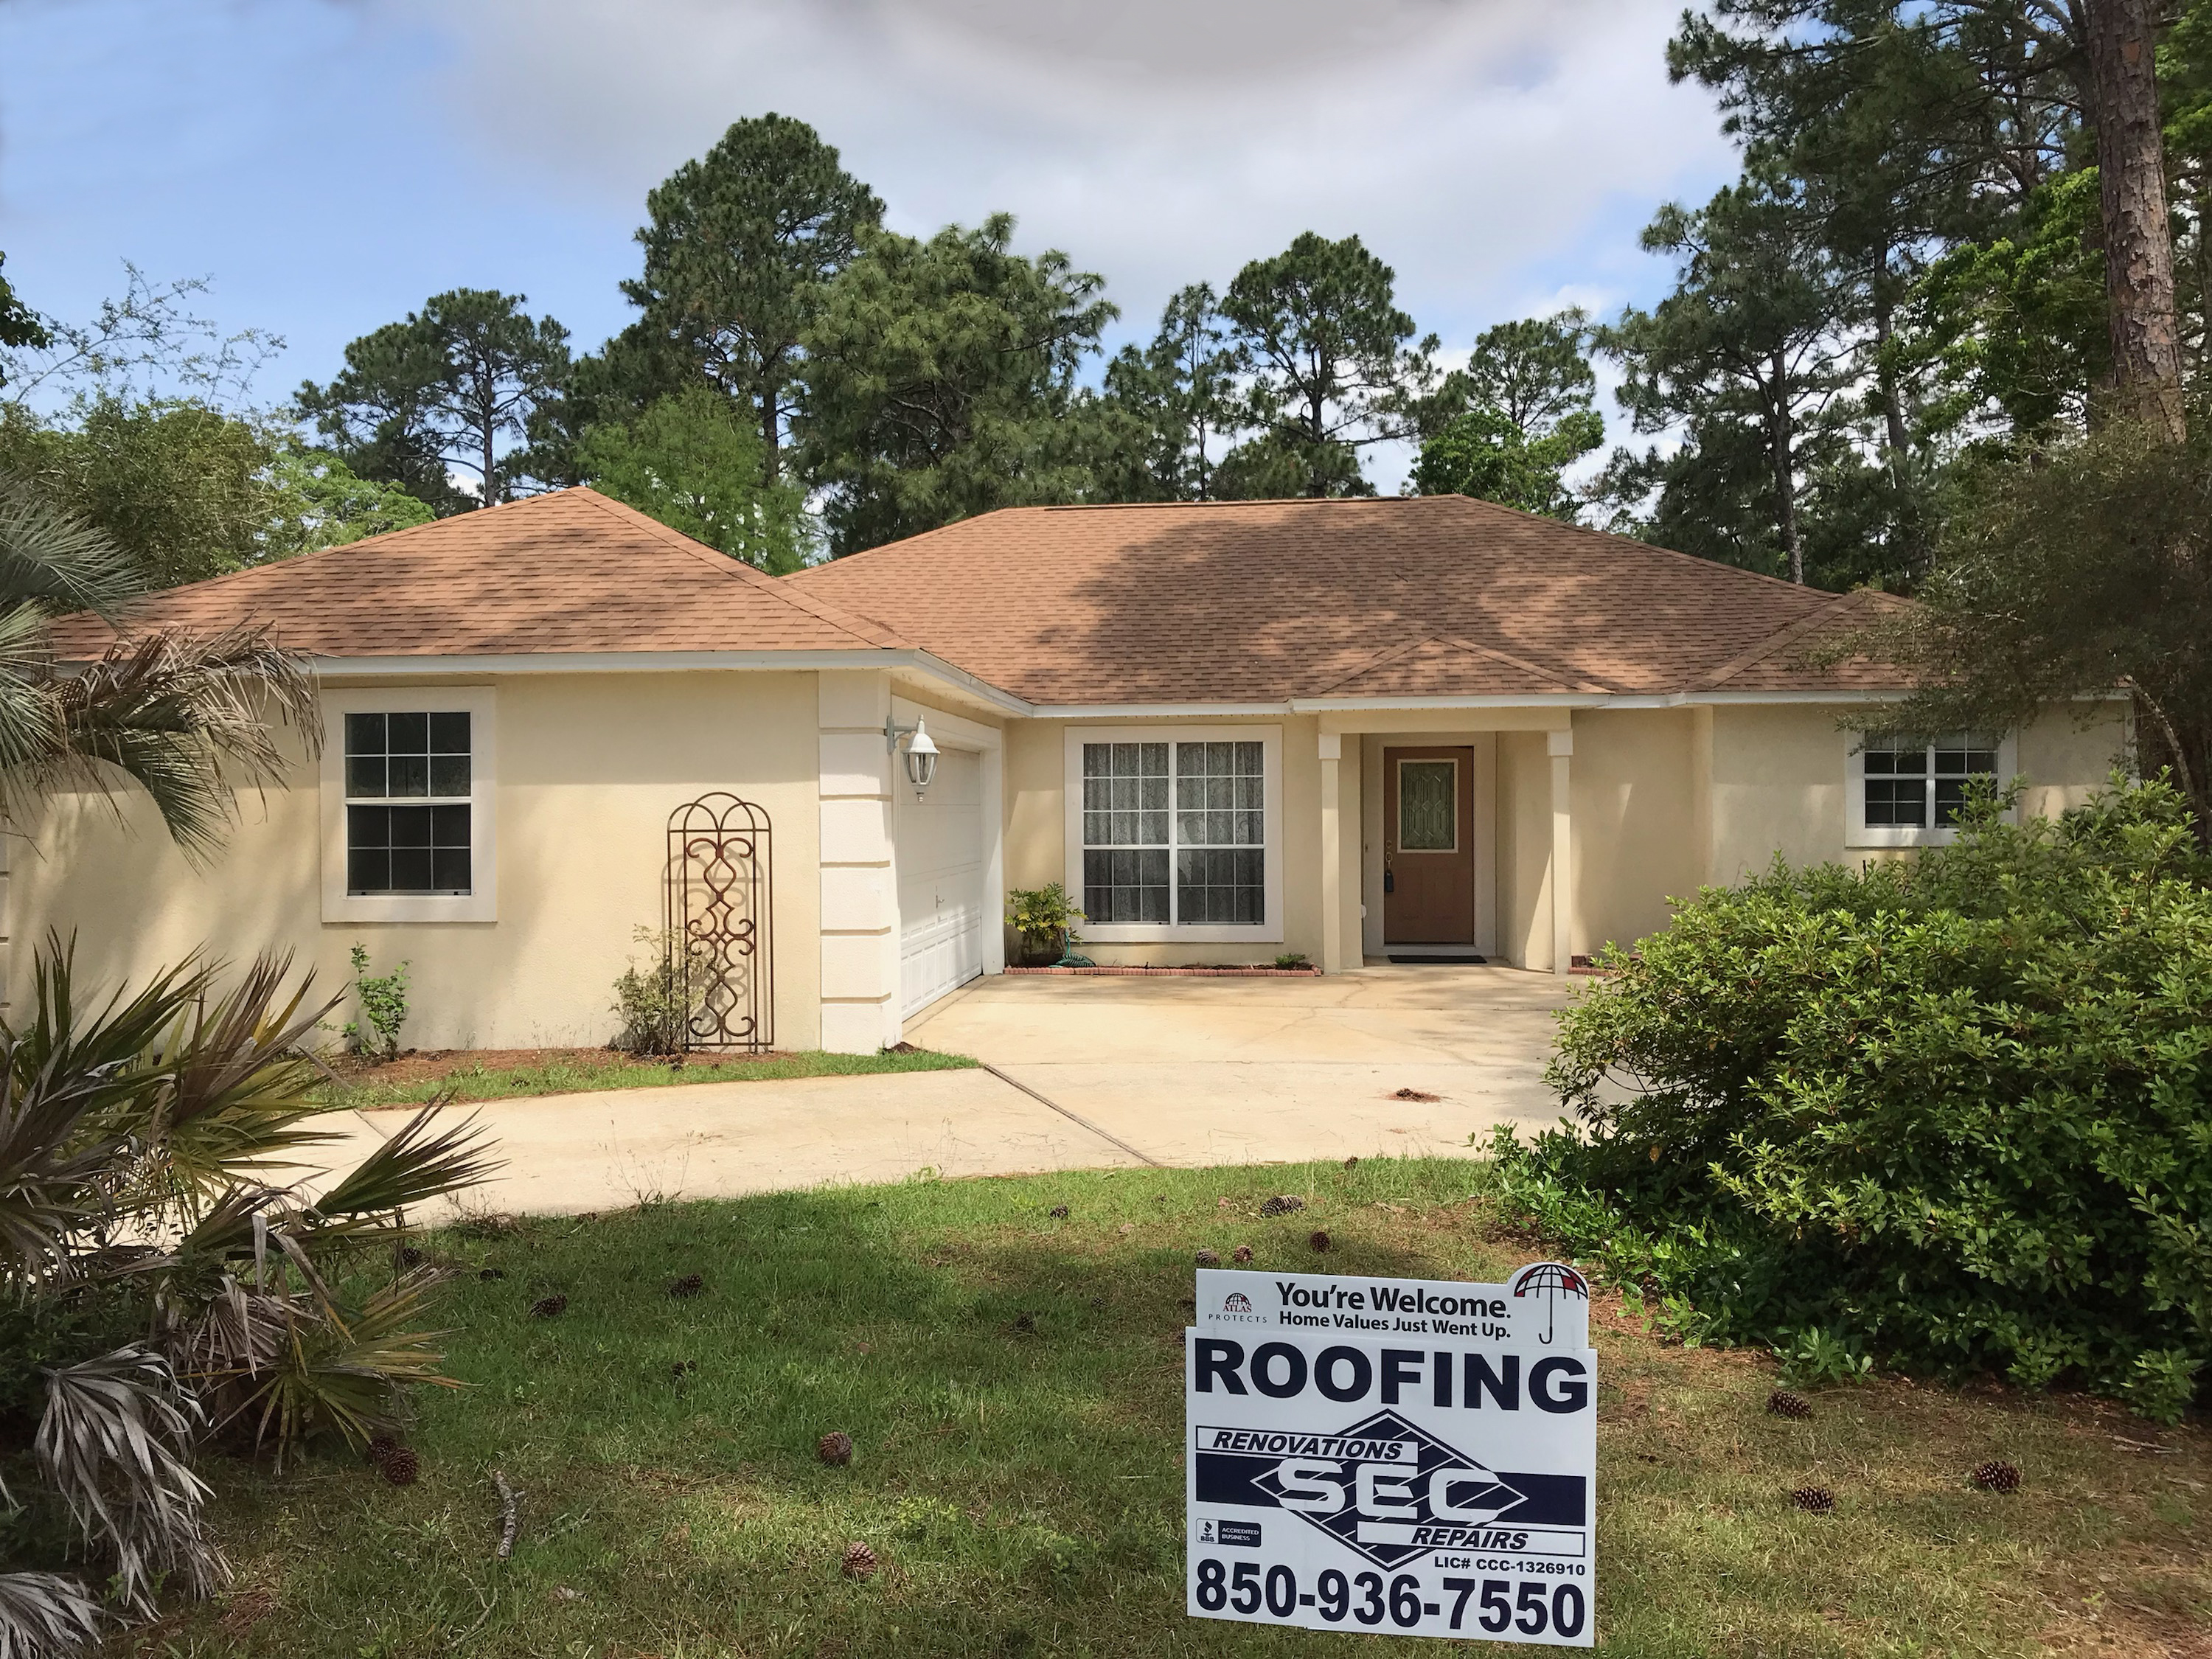 escambia county roofing